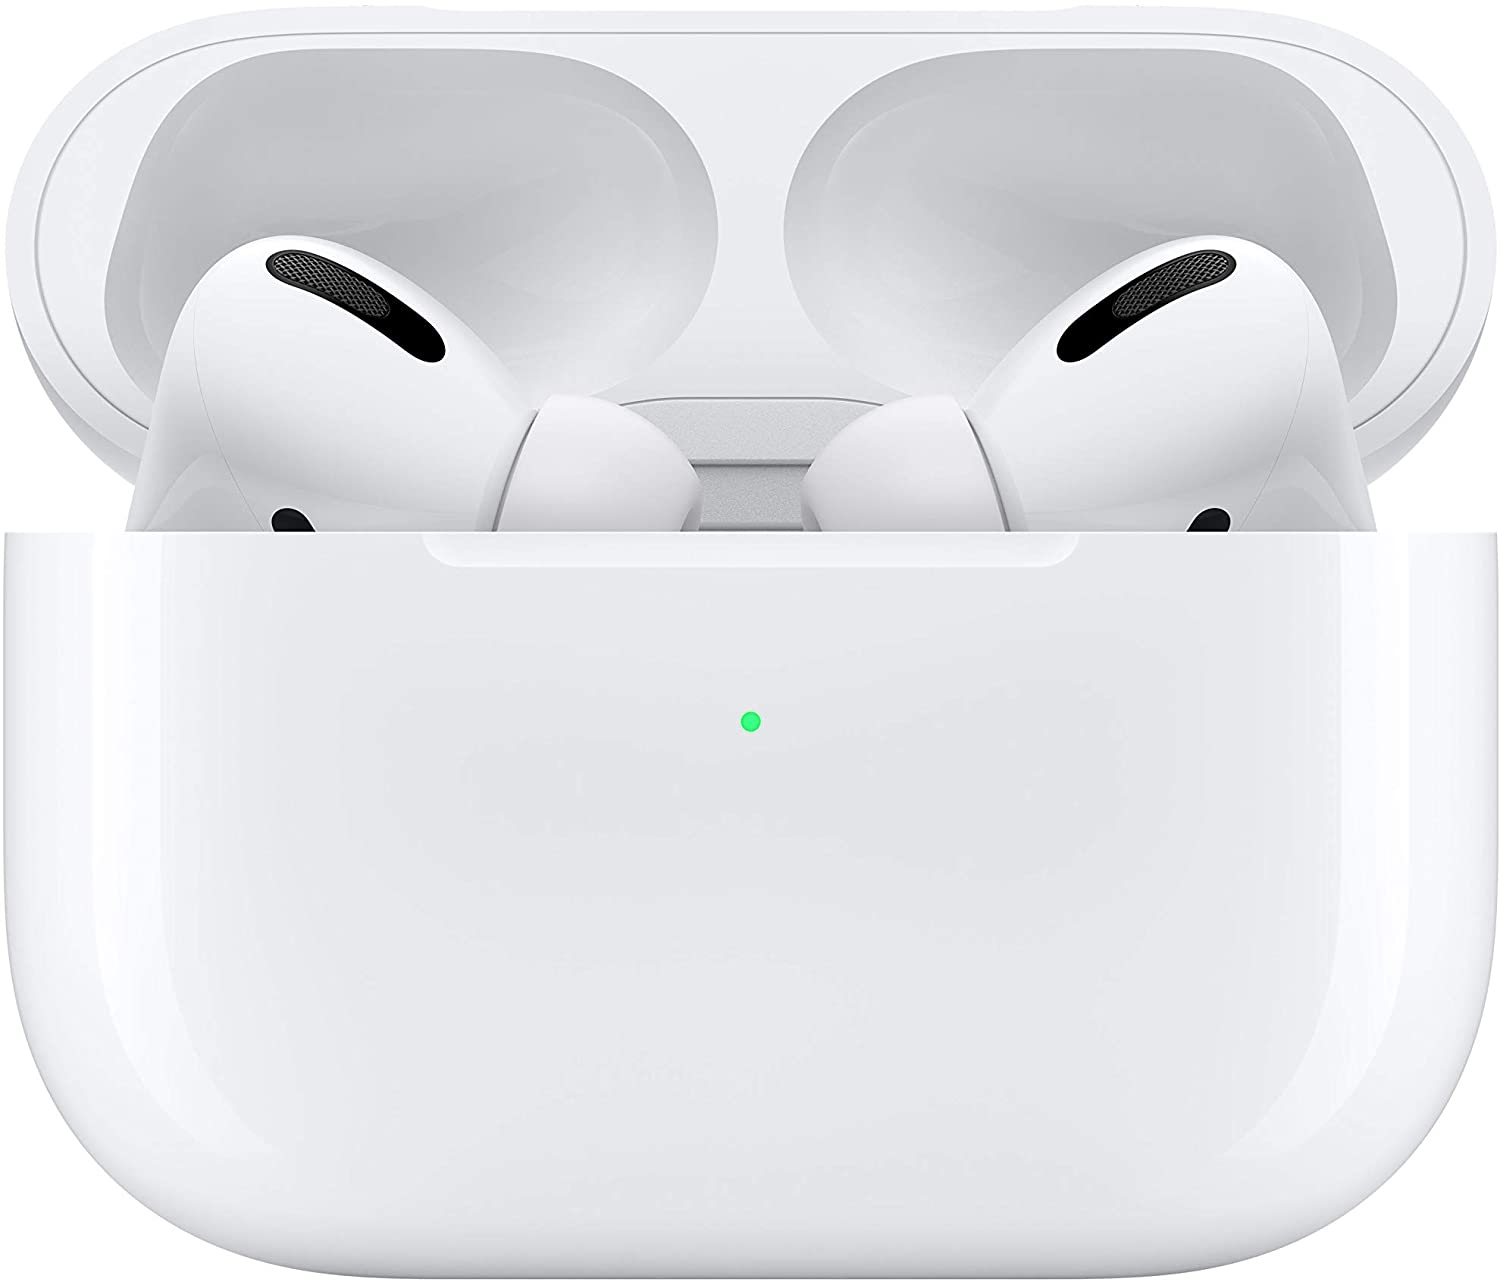 Apple is Designing New AirPod Models That Could Detect Hearing Loss